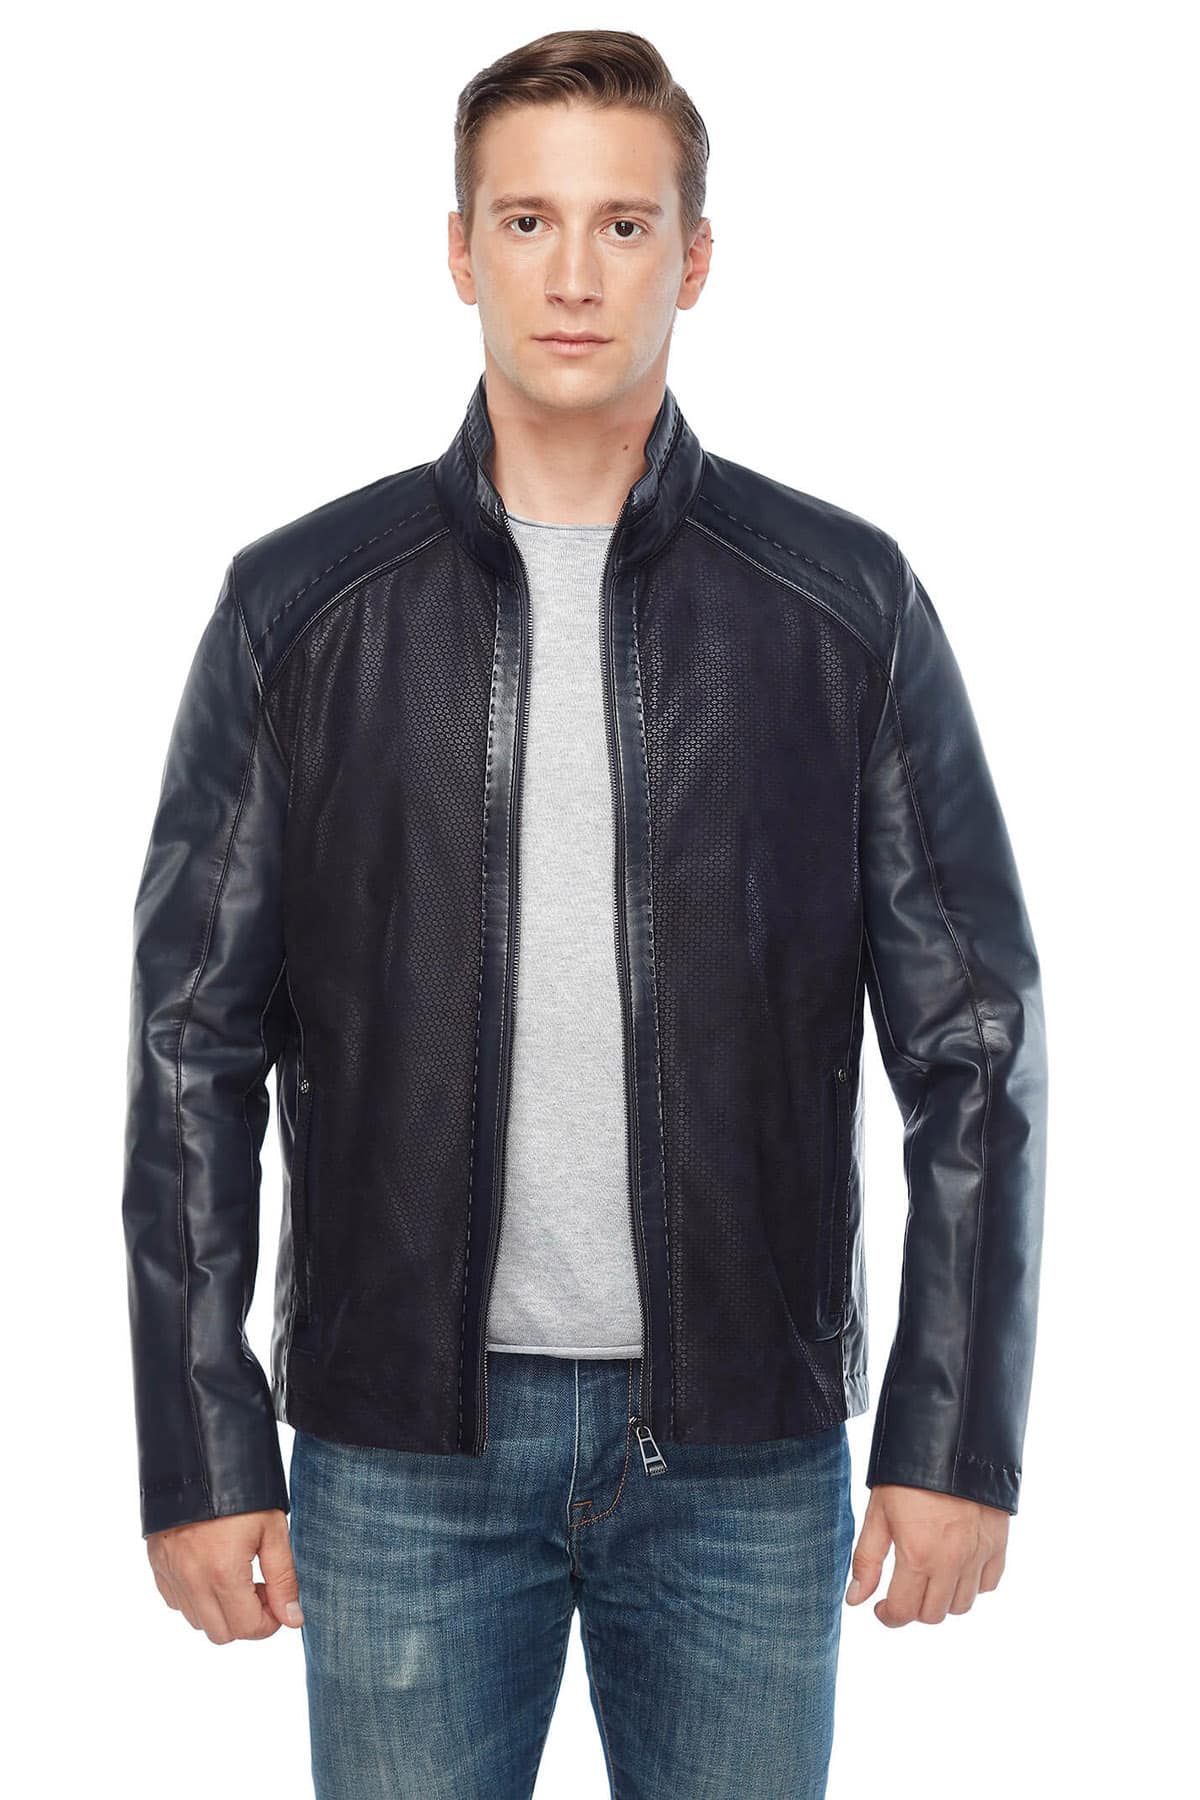 You've Searched for Navy Blue Men's Leather Jacket